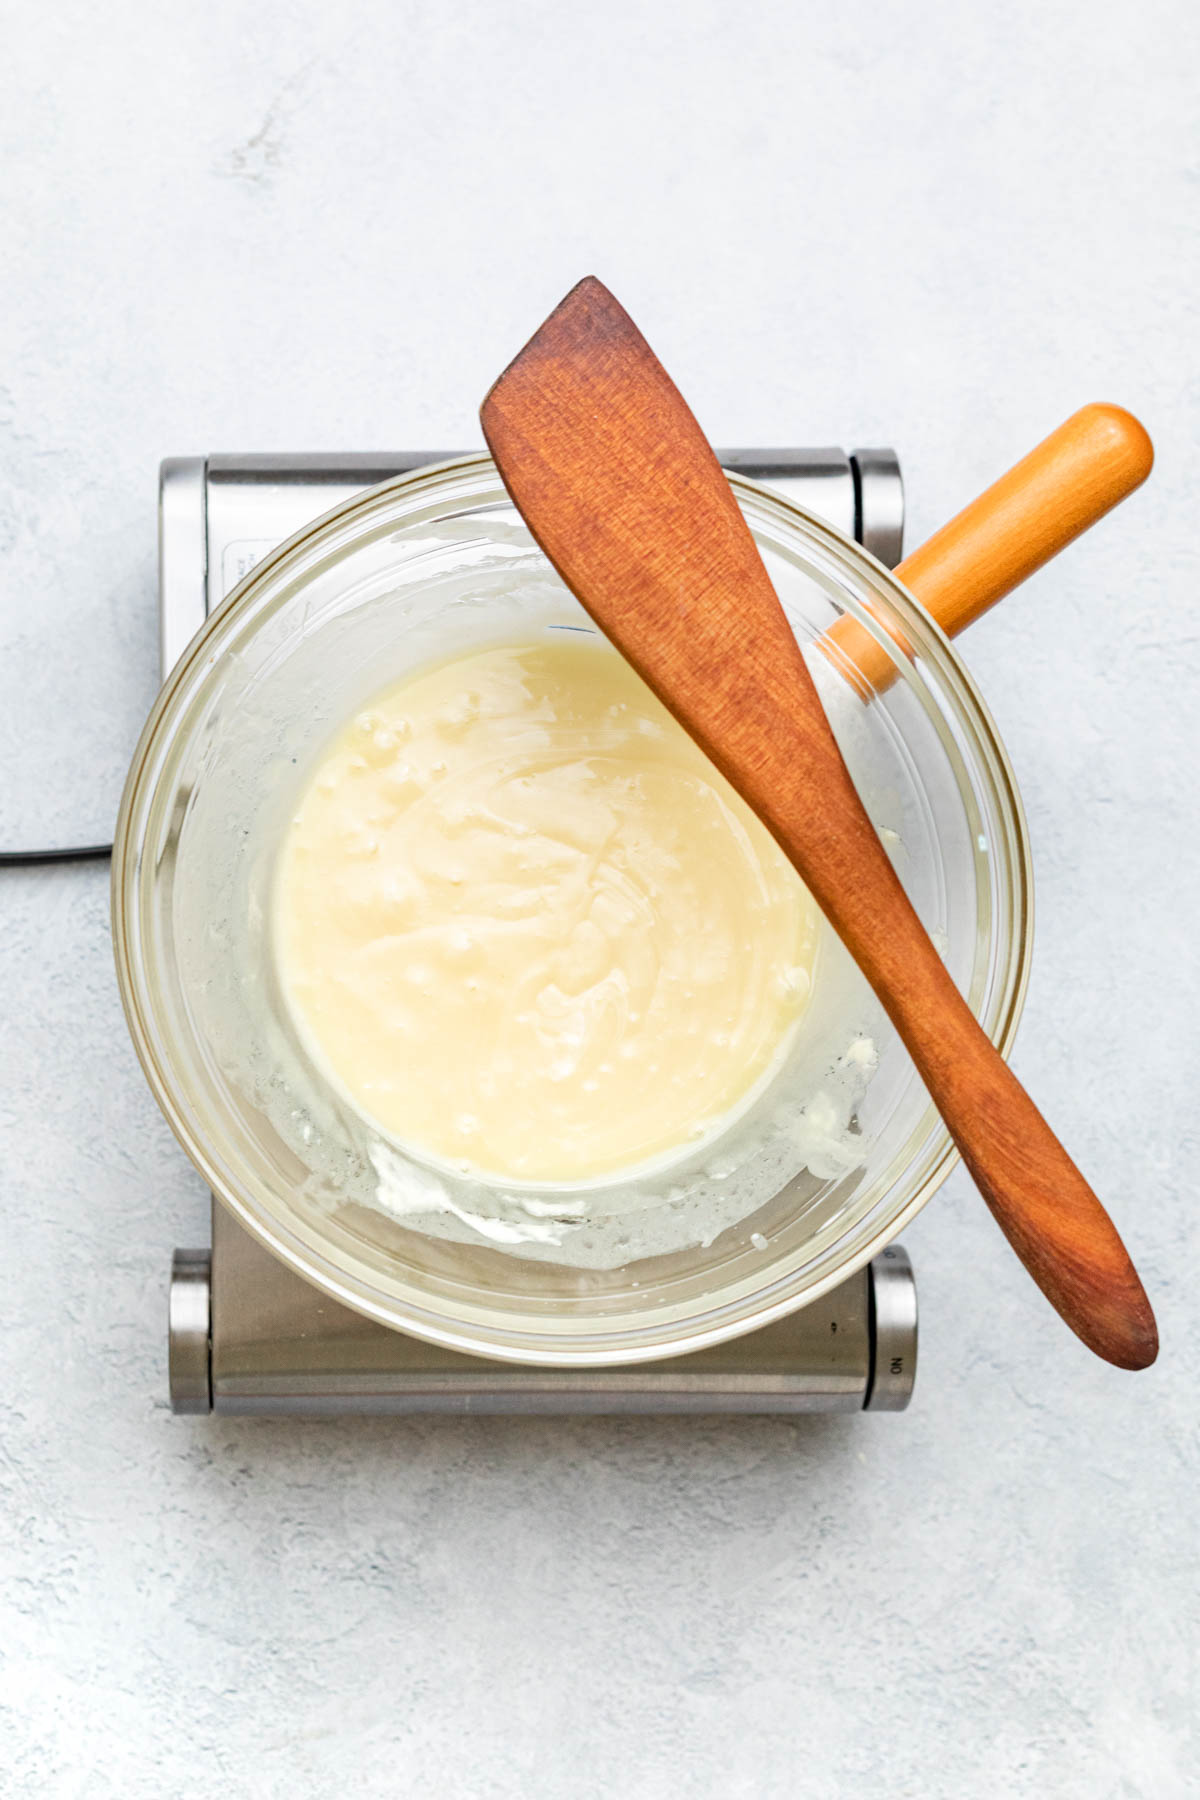 White chocolate and whipping cream heated together in a double boiler on an induction stove.